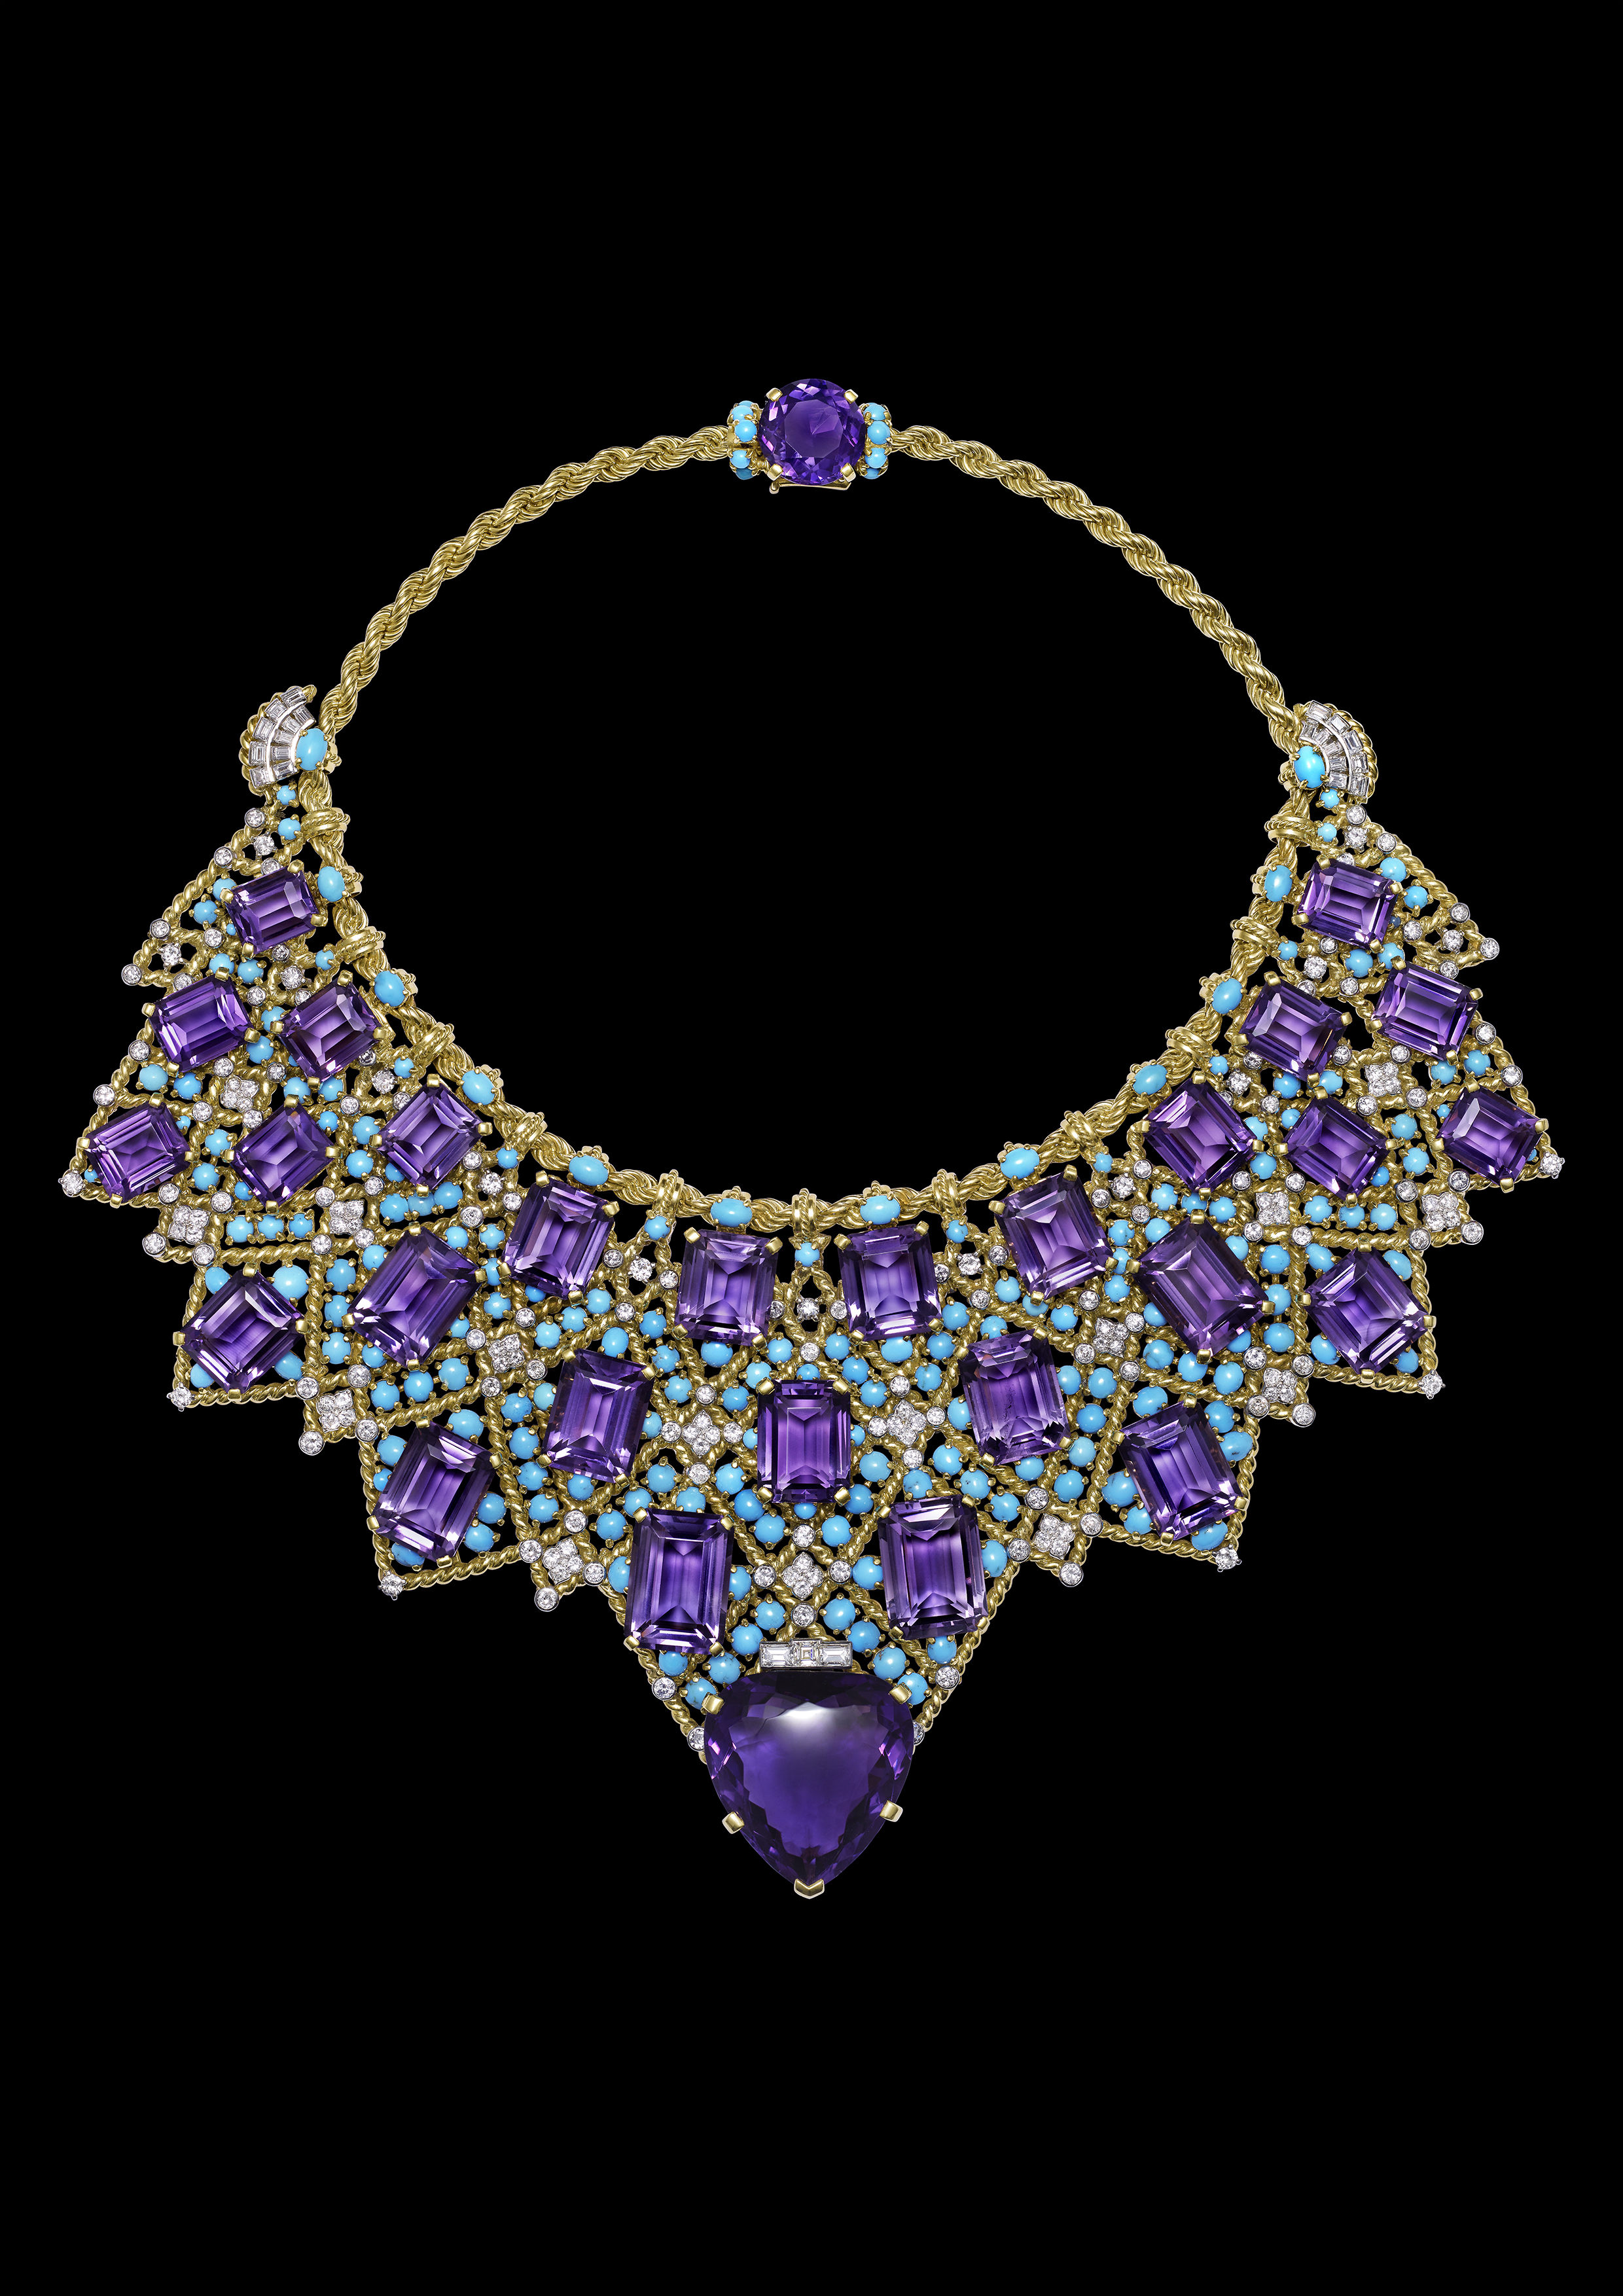 Bib necklace, Cartier Paris, special order, 1947. Twisted 18K and 20K gold, platinum, brilliant- and baguette-cut diamonds, one heart-shaped faceted amethyst, 27 emerald-cut amethysts, one oval faceted amethyst, turquoise cabochons. Cartier Collection. Nils Herrmann, Cartier Collection © Cartier 